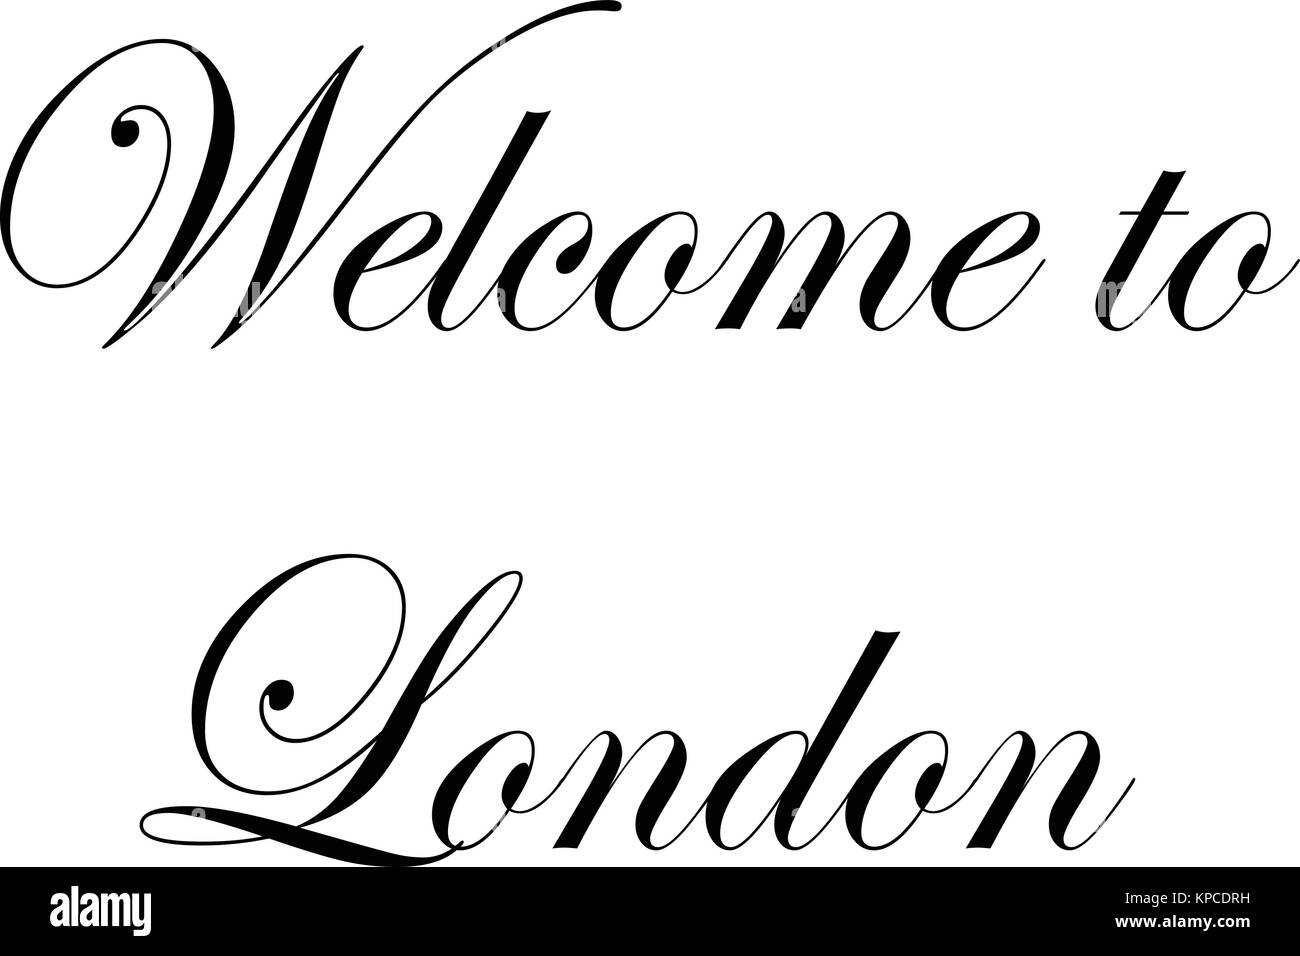 Welcome to london text sign illuastration on white background Stock Vector